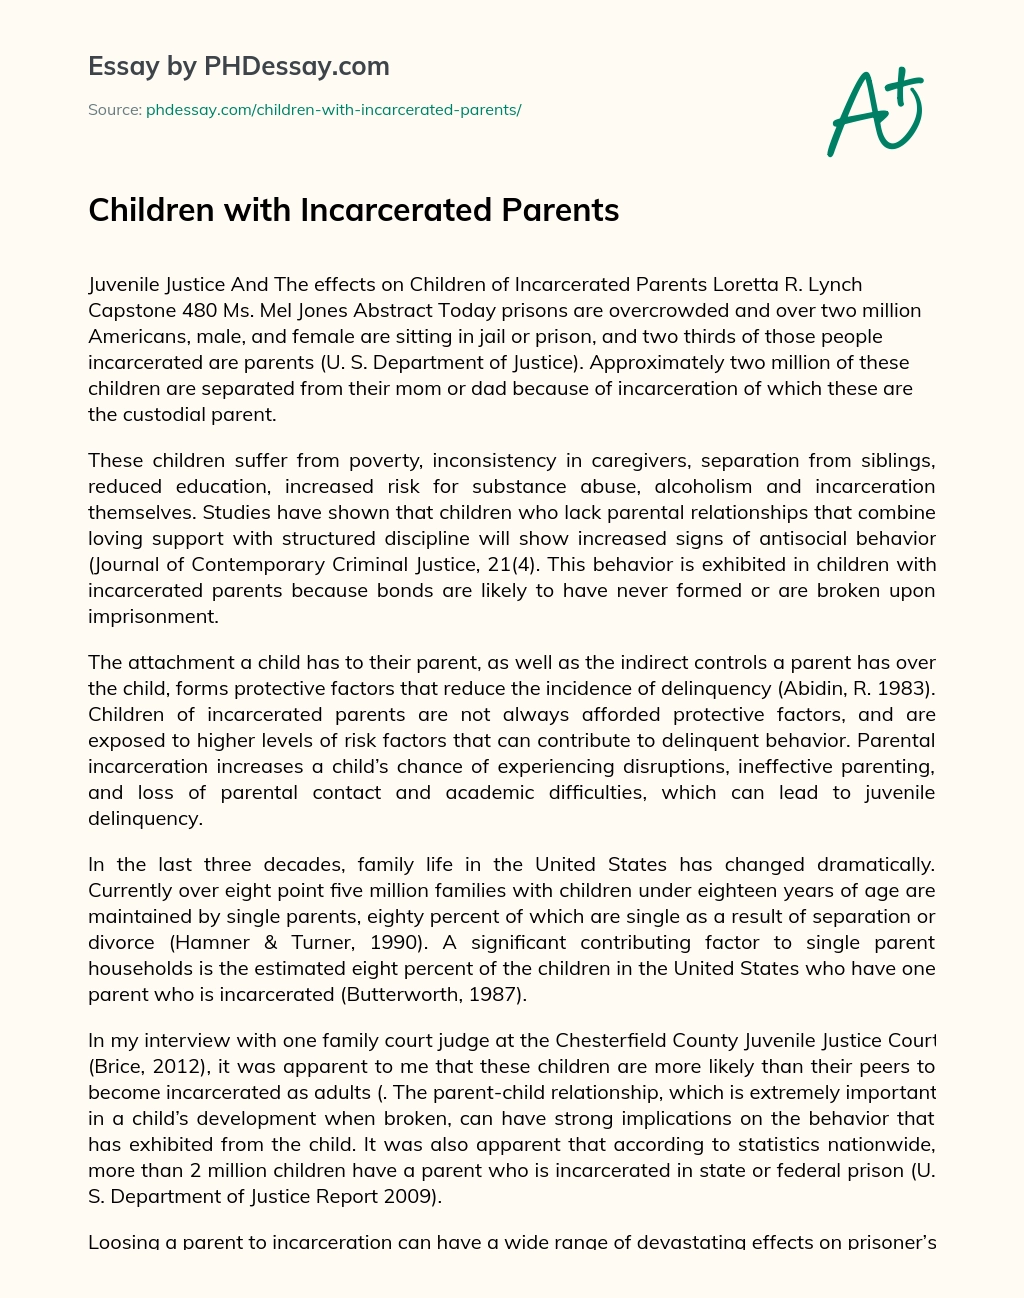 Children with Incarcerated Parents essay